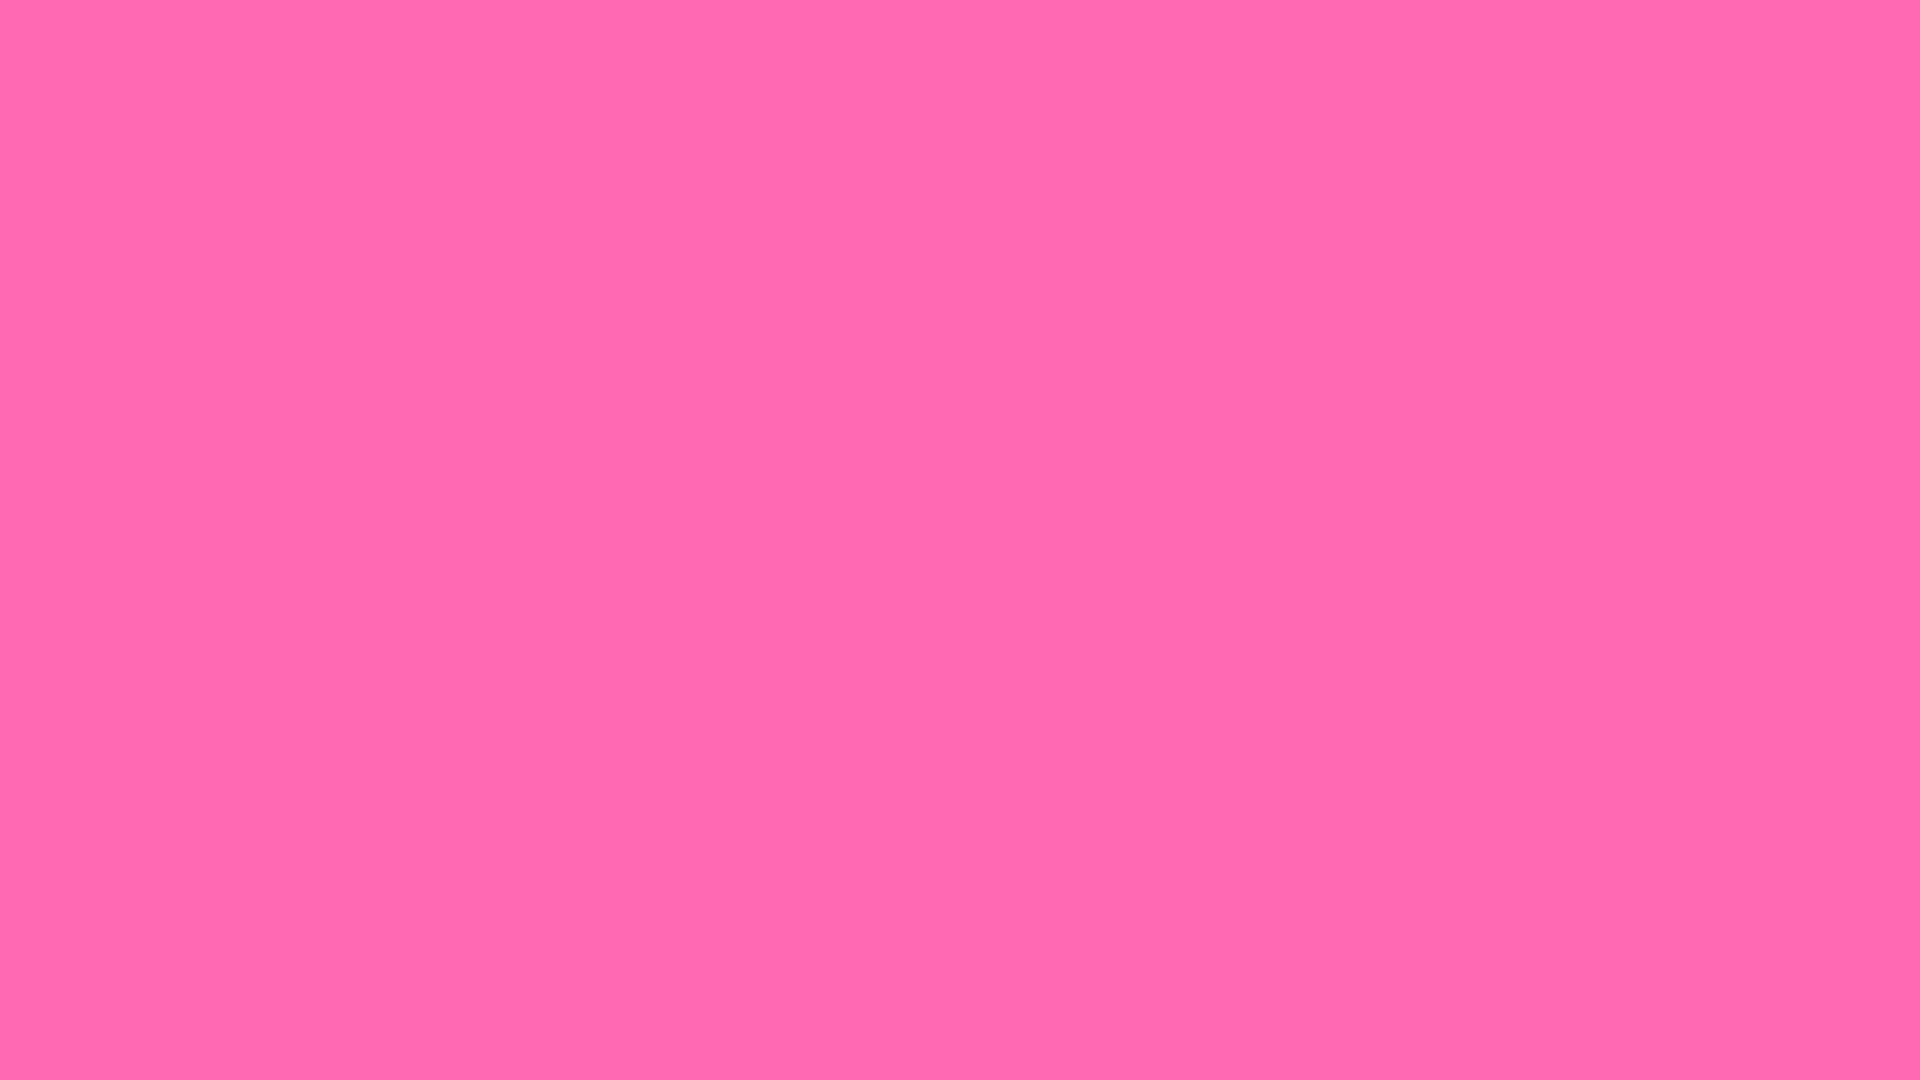 Plain Neon Pink Background Solid Light